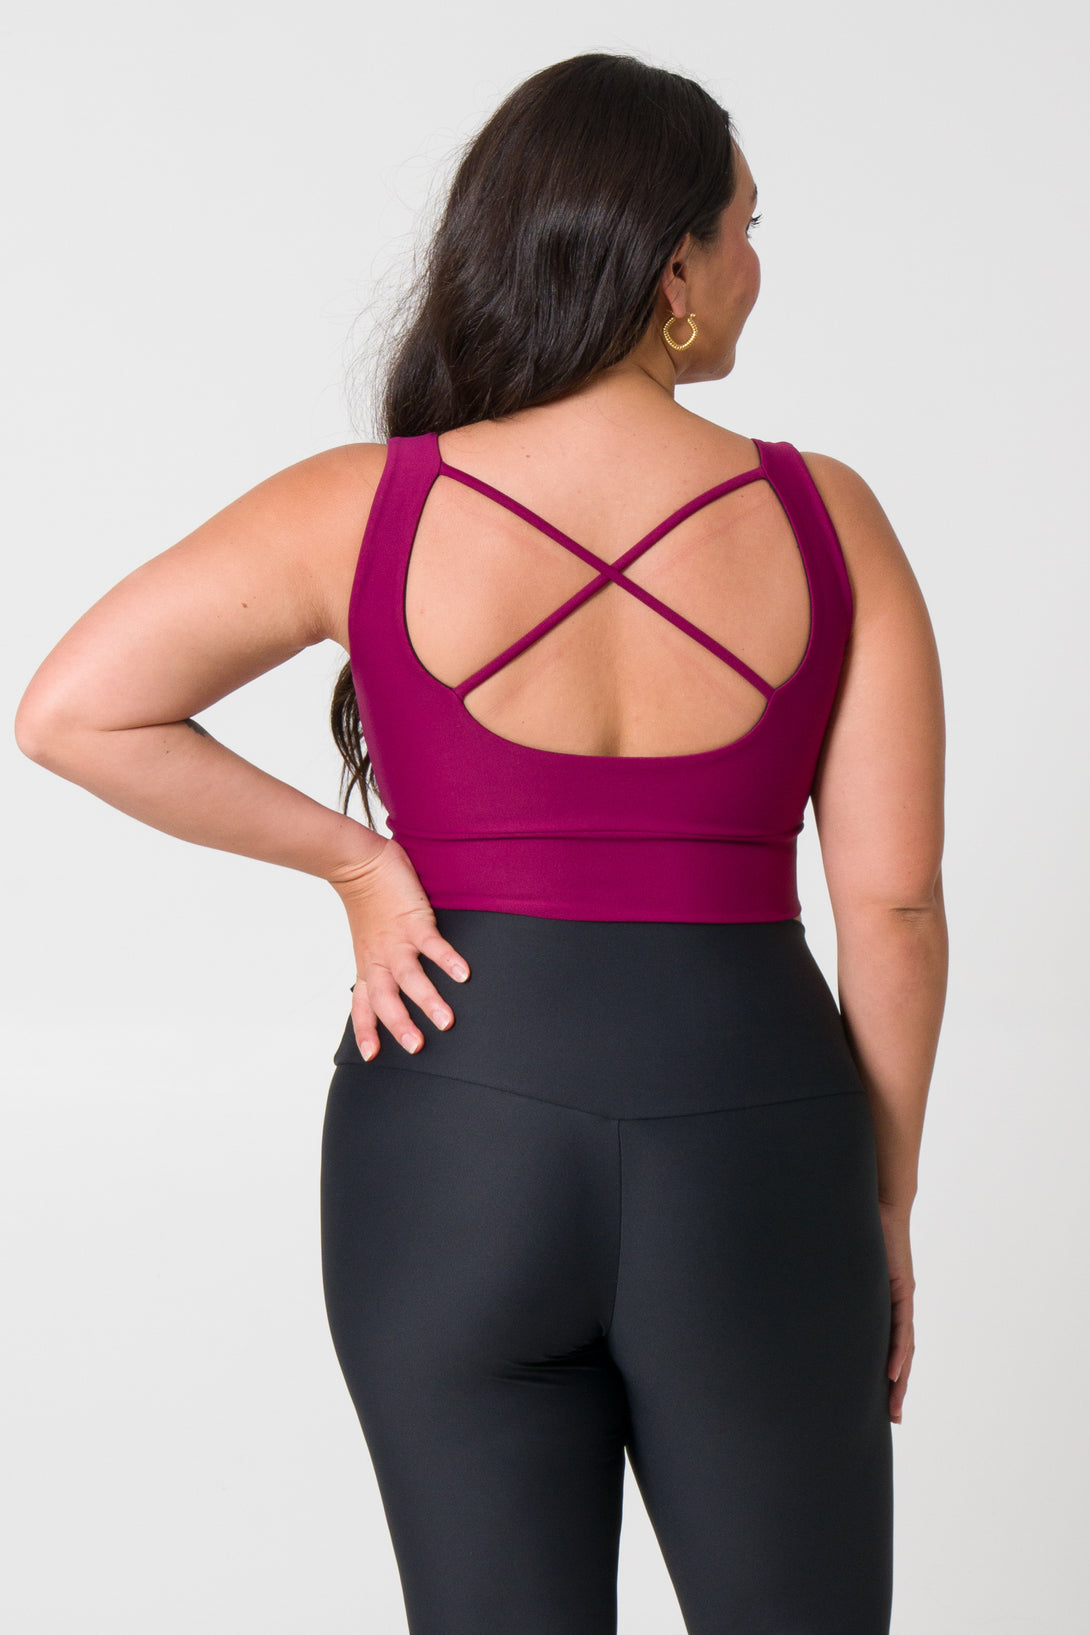 Berry scoop neck comfort crop top, offering both comfort and style for active women during workouts or casual wear.